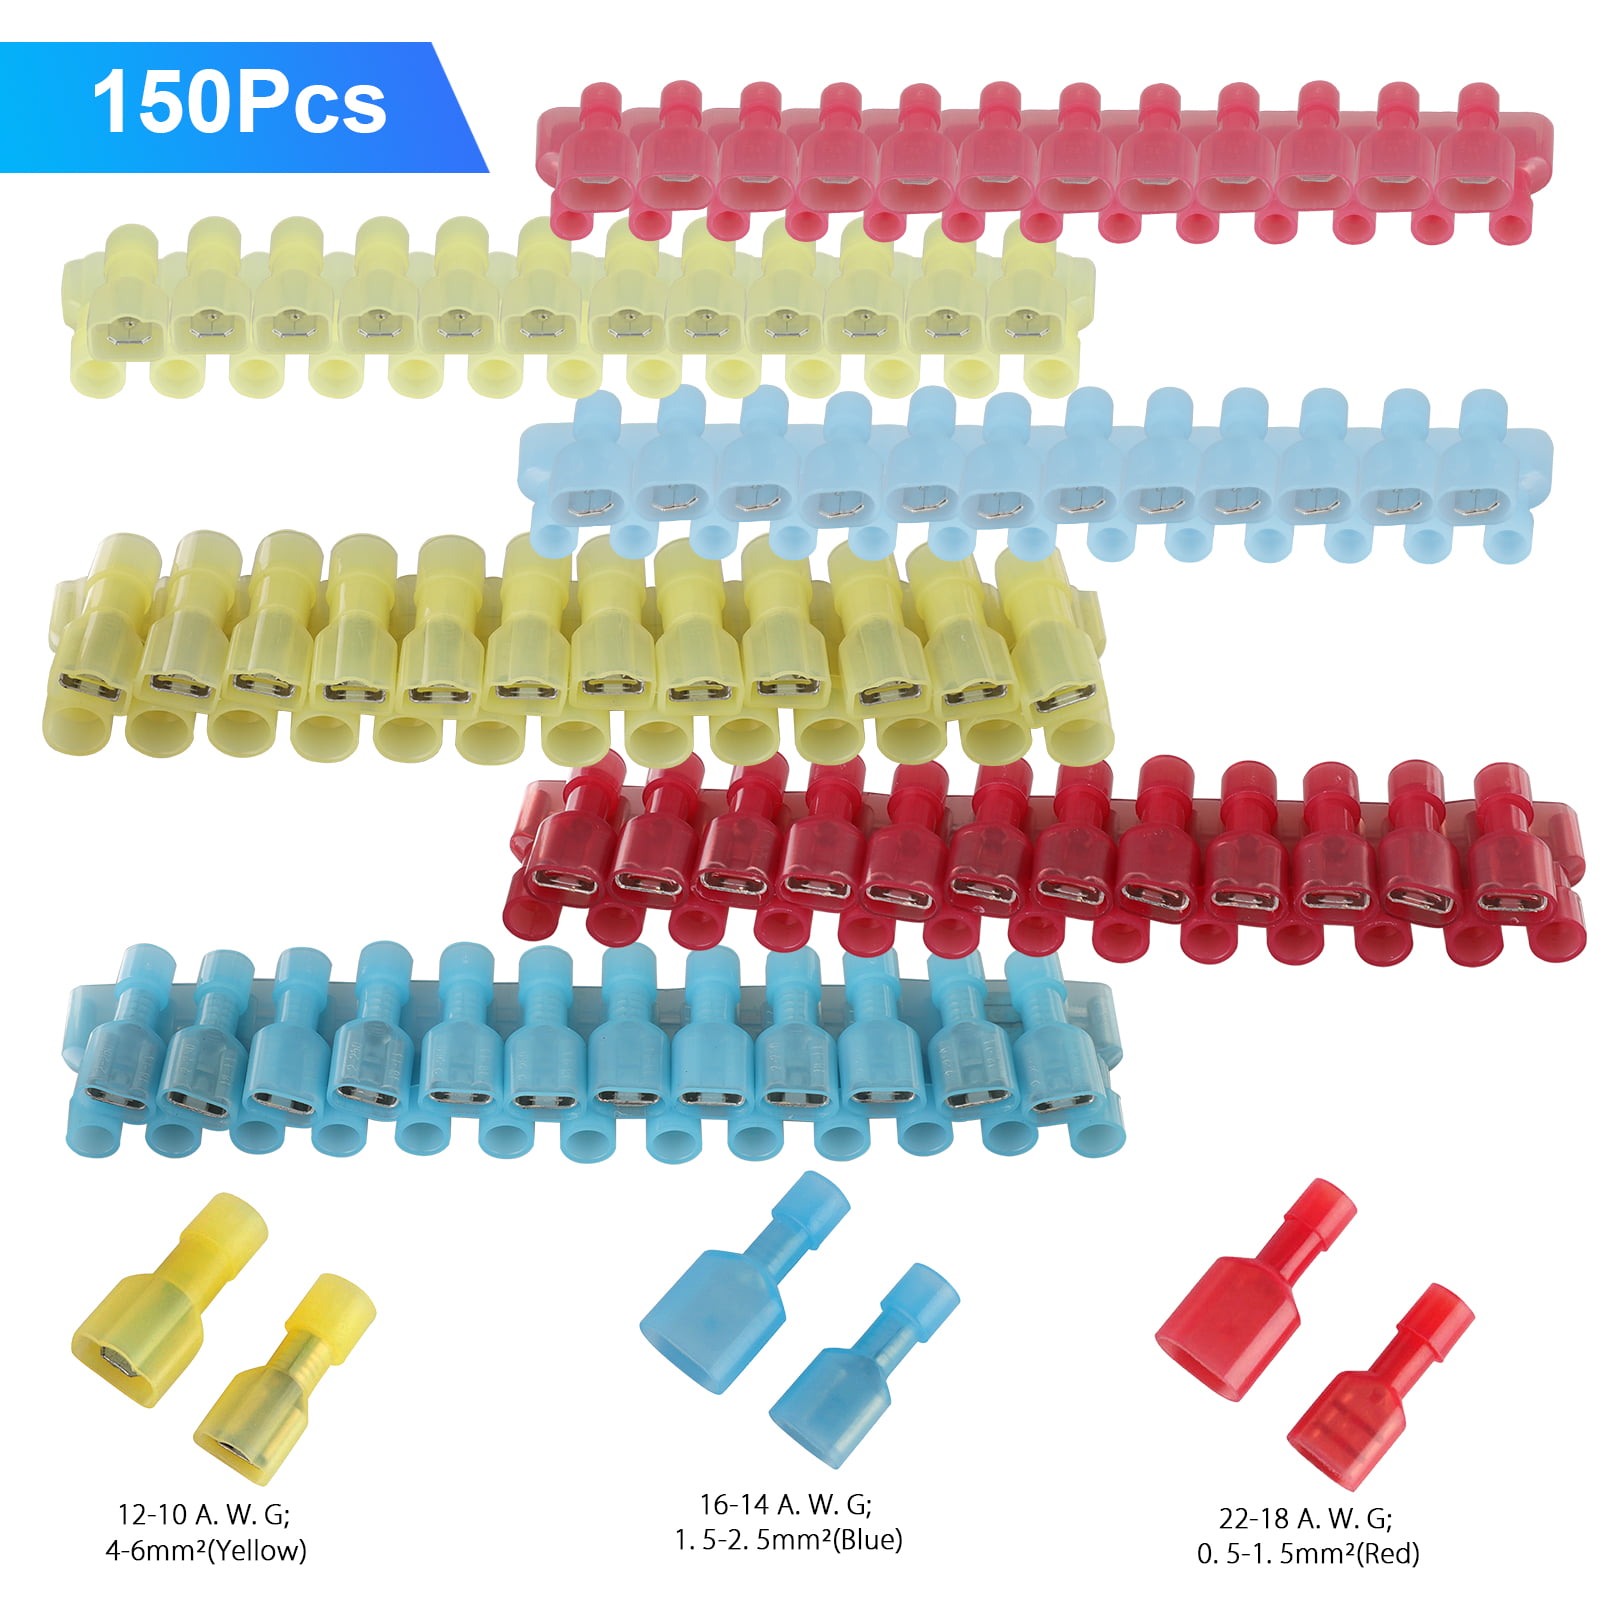 100Pairs Brass Crimp Terminal Female Spade Connectors with Insulating Sleeve PL